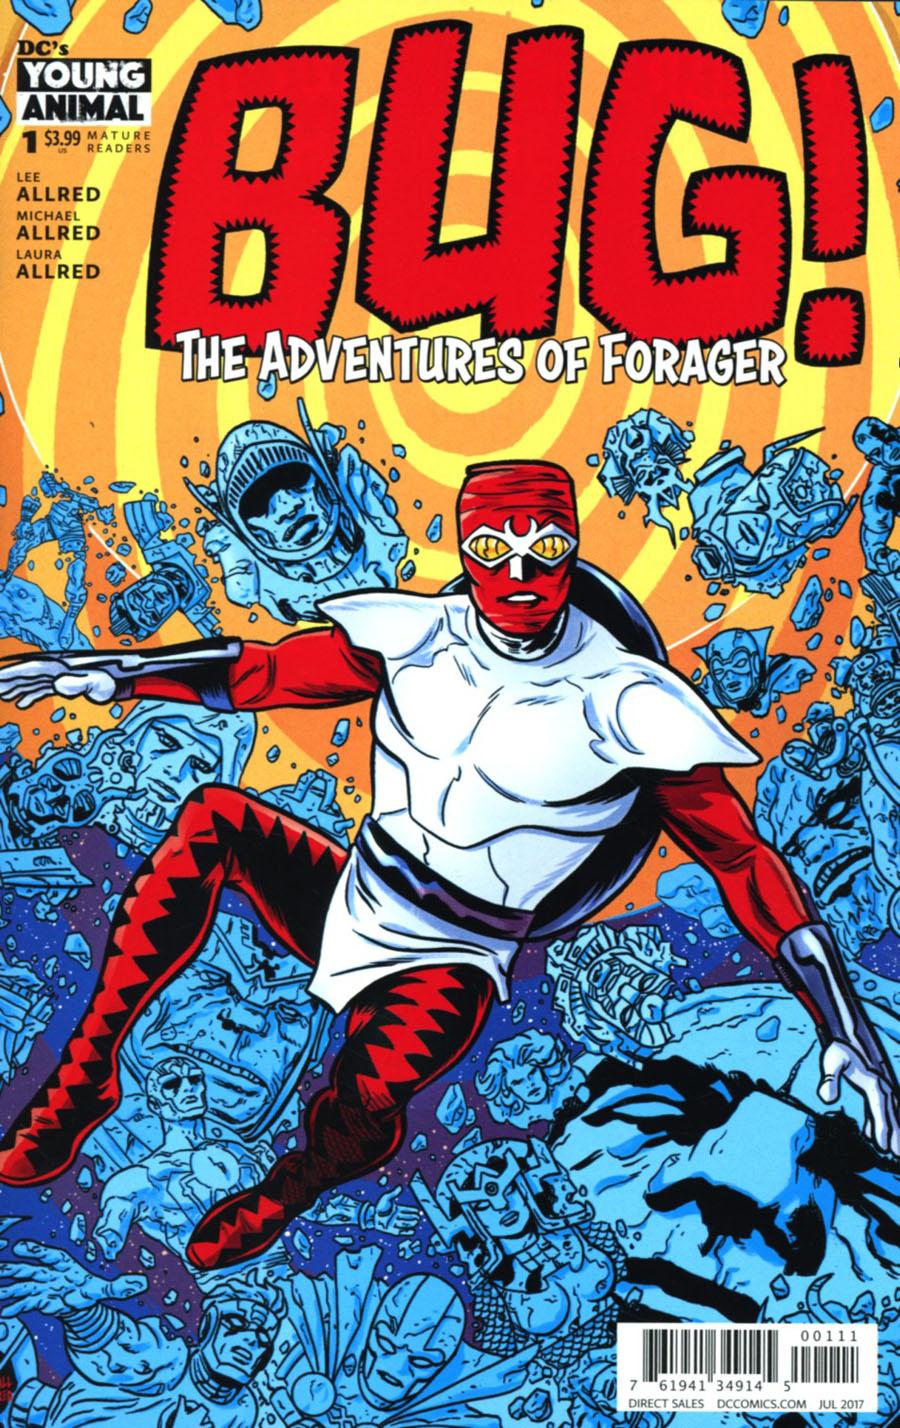 Bug The Adventures Of Forager Vol. 1 #1